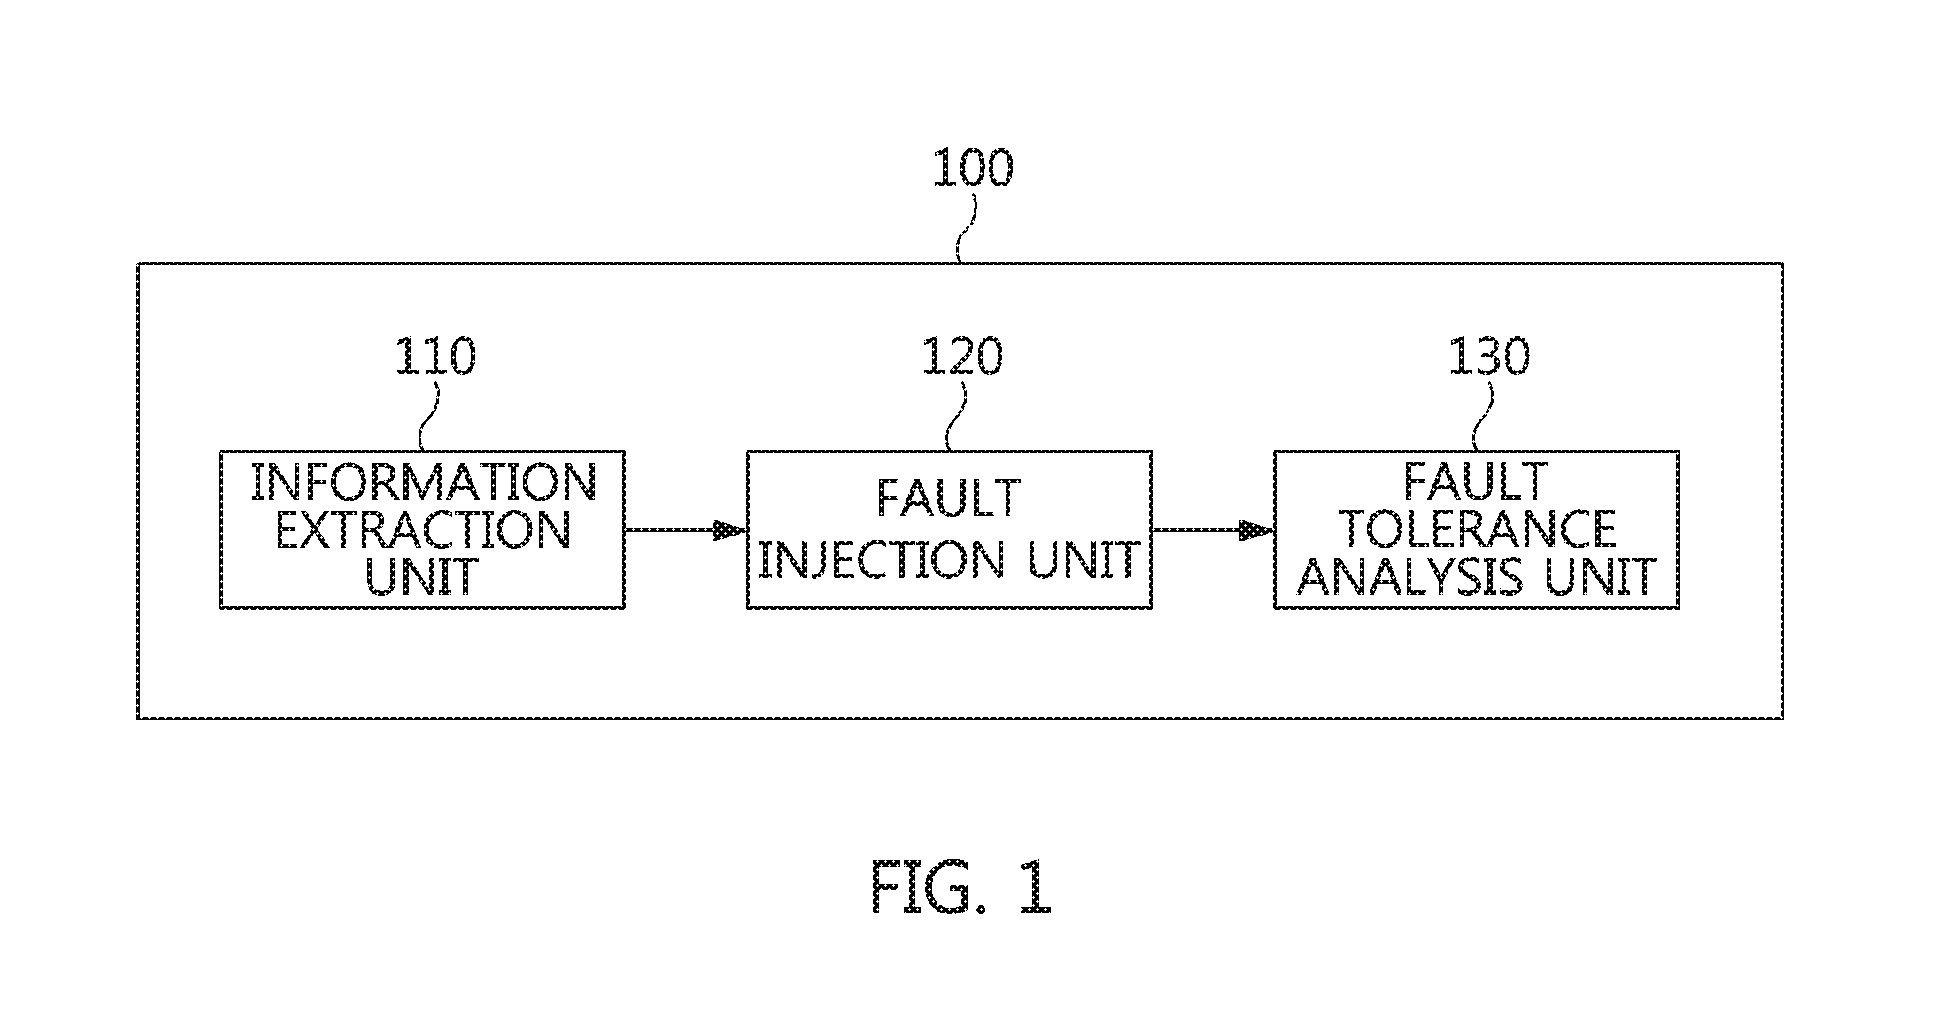 Method and apparatus for injecting fault and analyzing fault tolerance